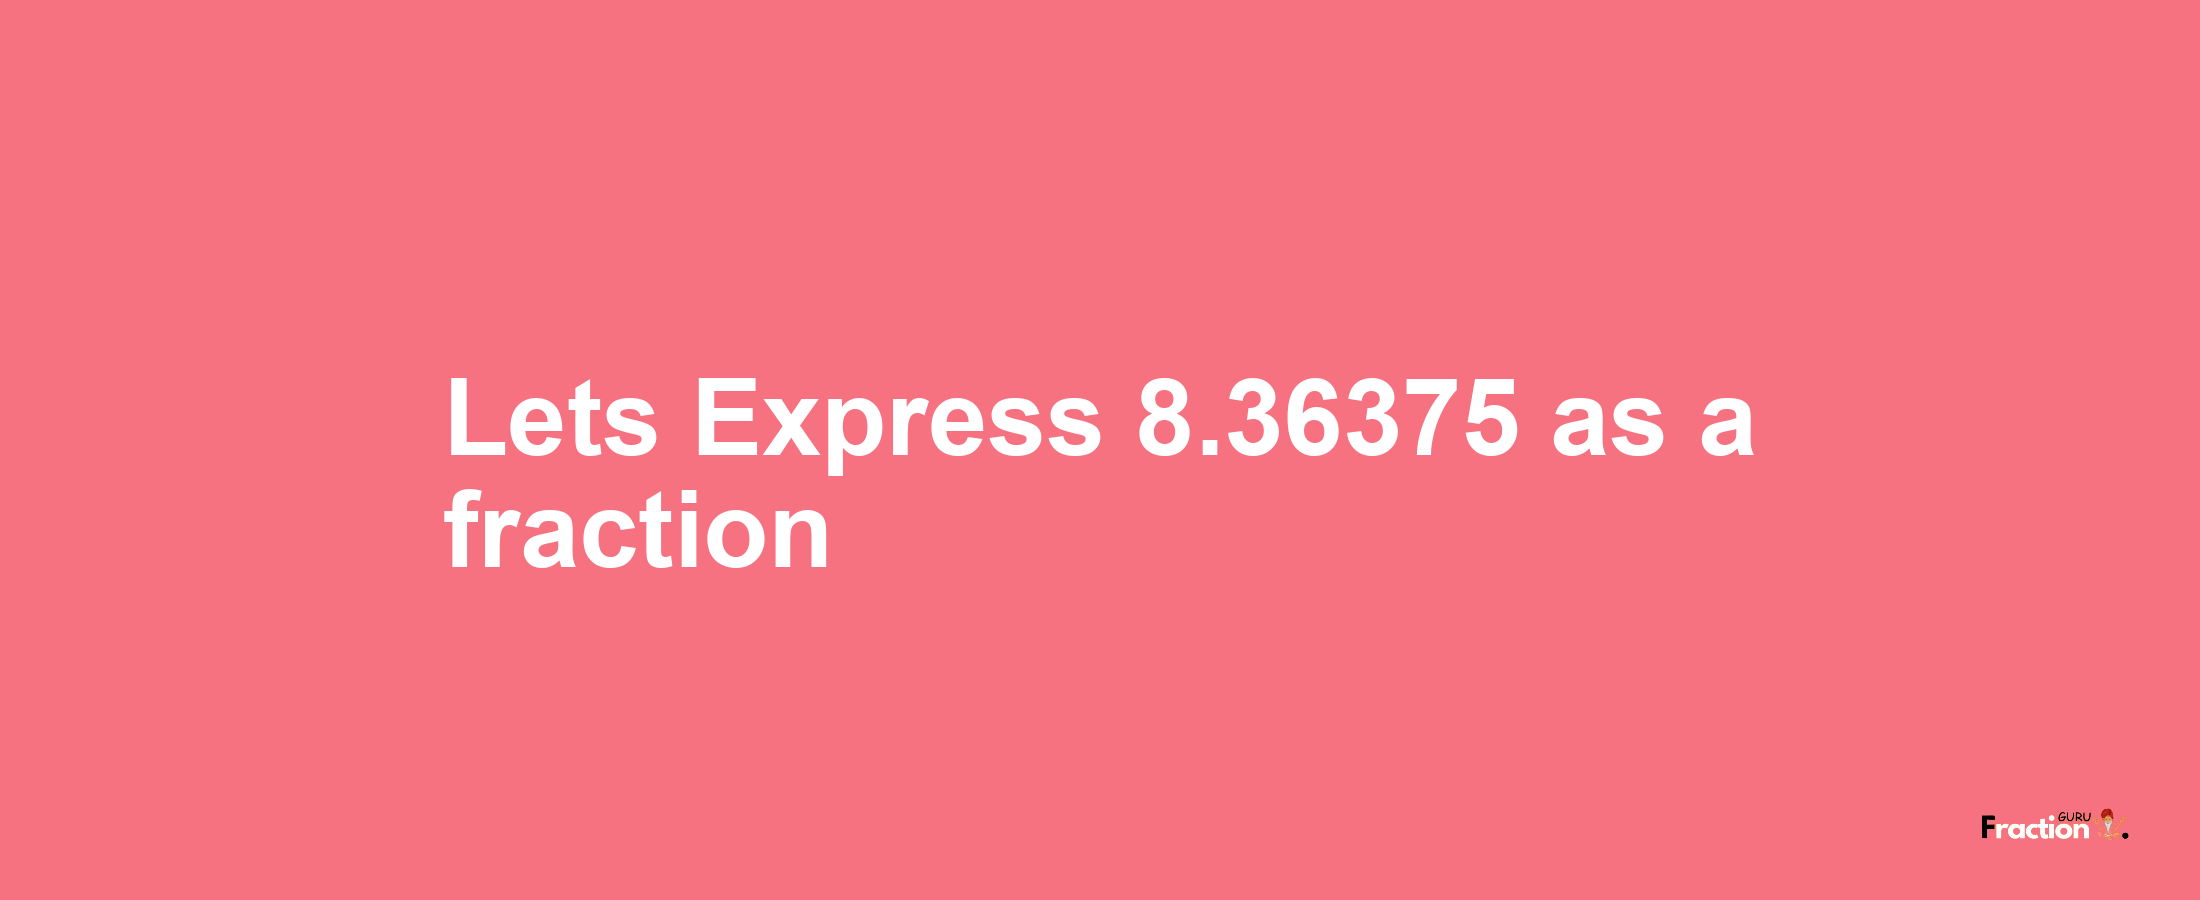 Lets Express 8.36375 as afraction